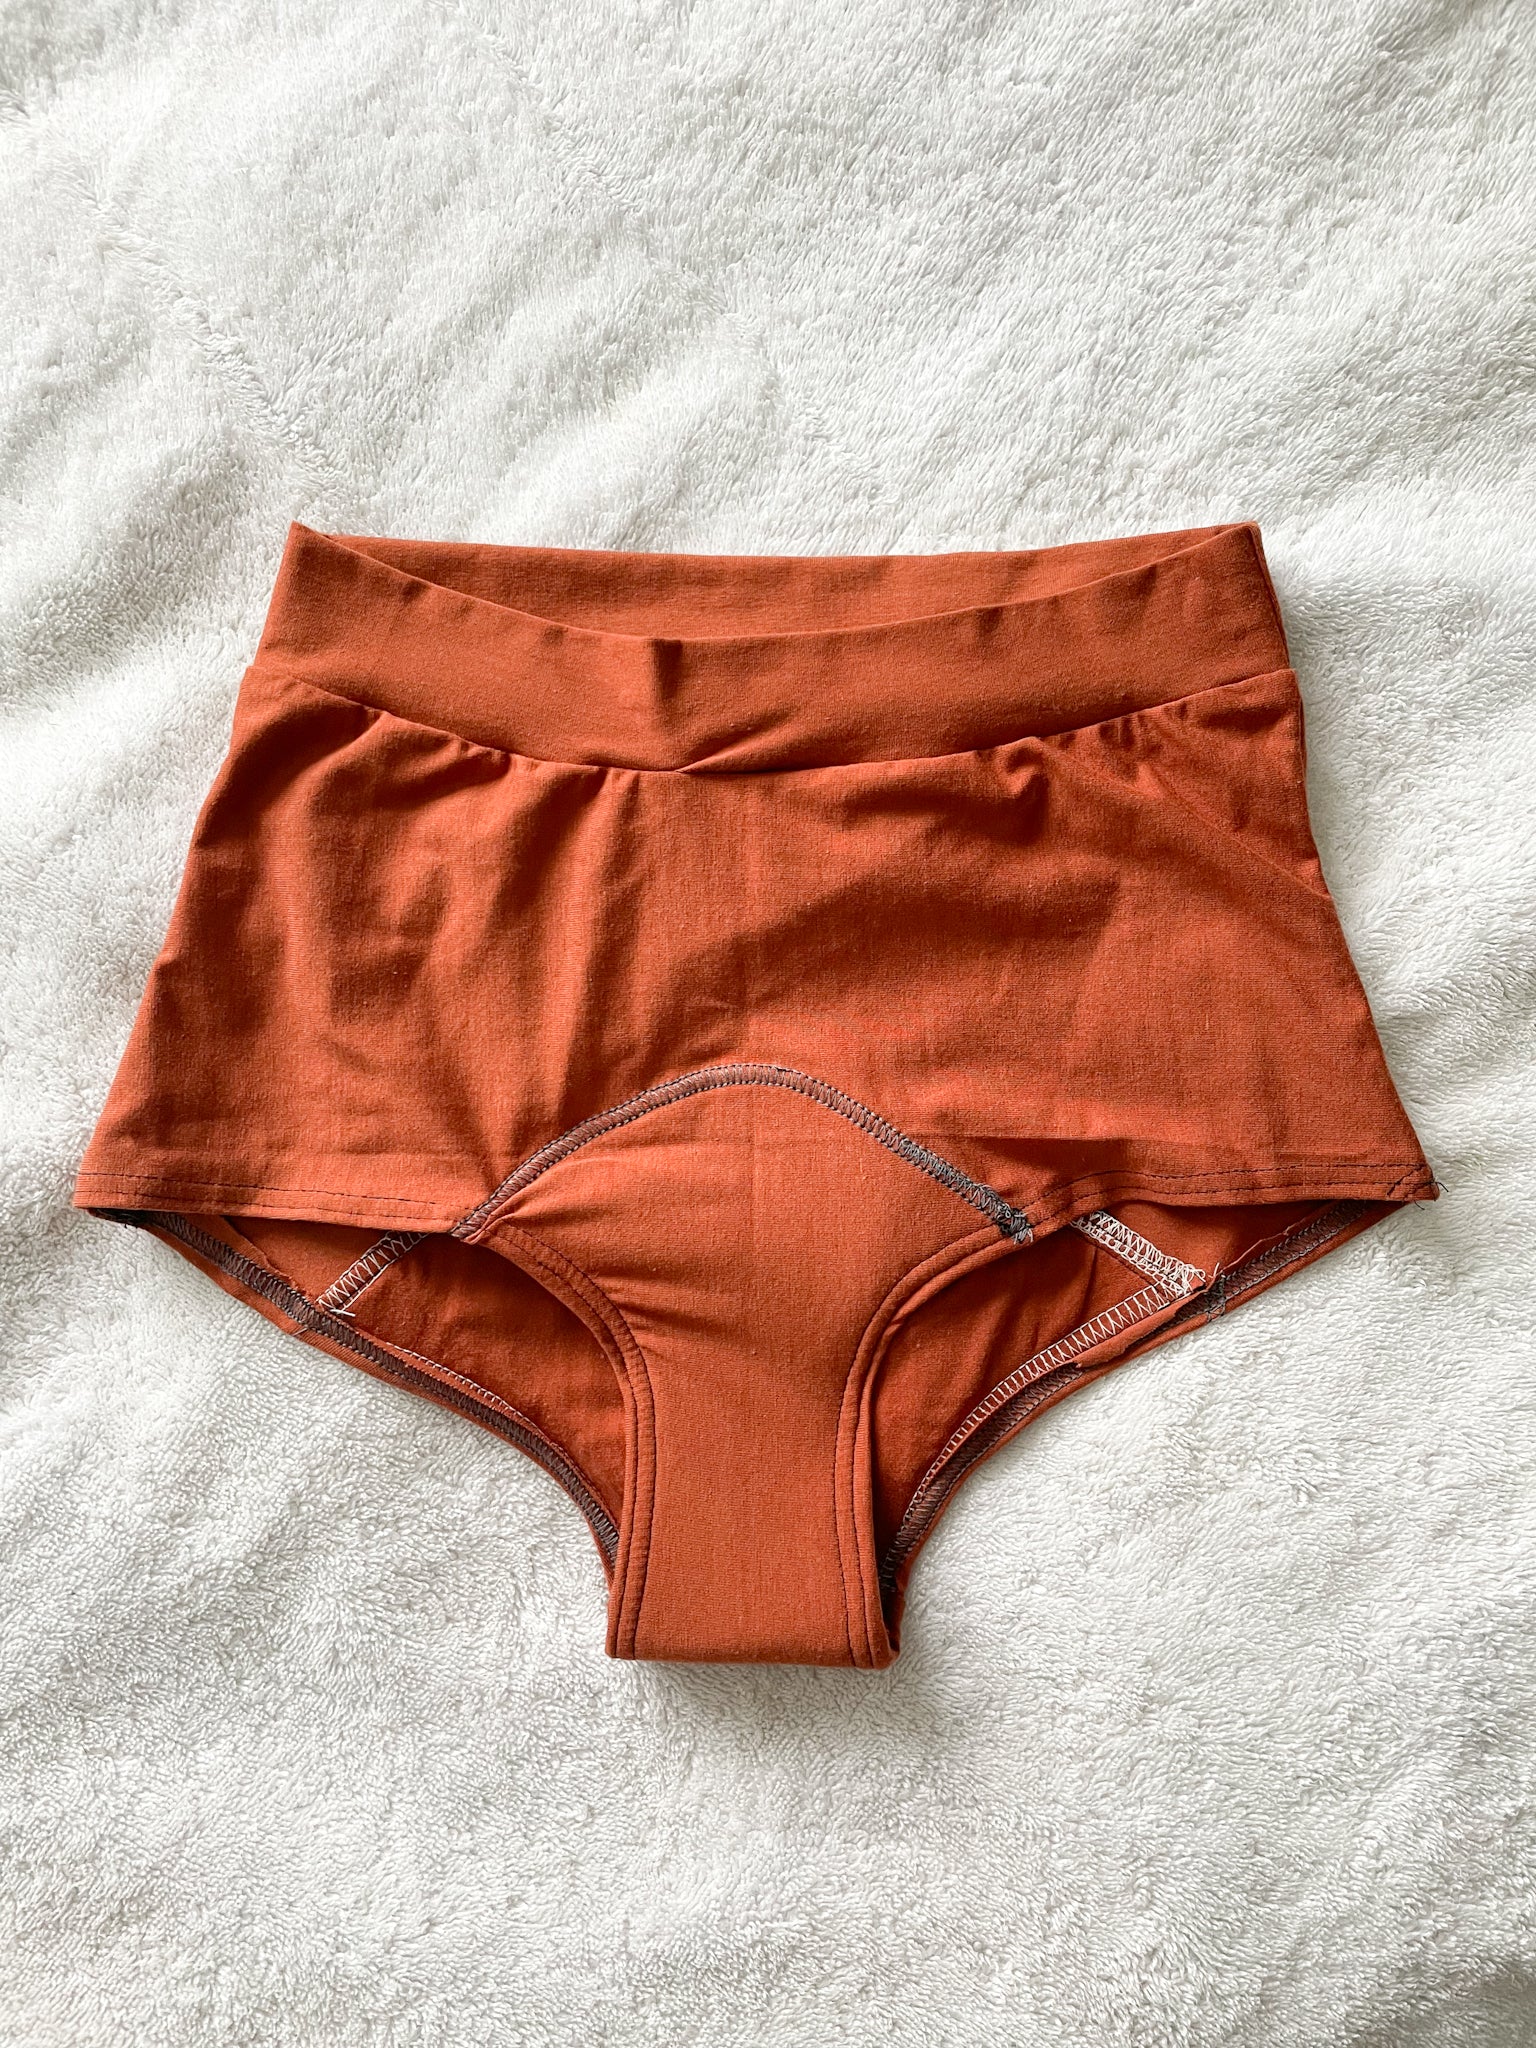 Bamboo Shorties for Heavy Flow  Period Panties For Teens and Adults - Buy  Online – Blushproof